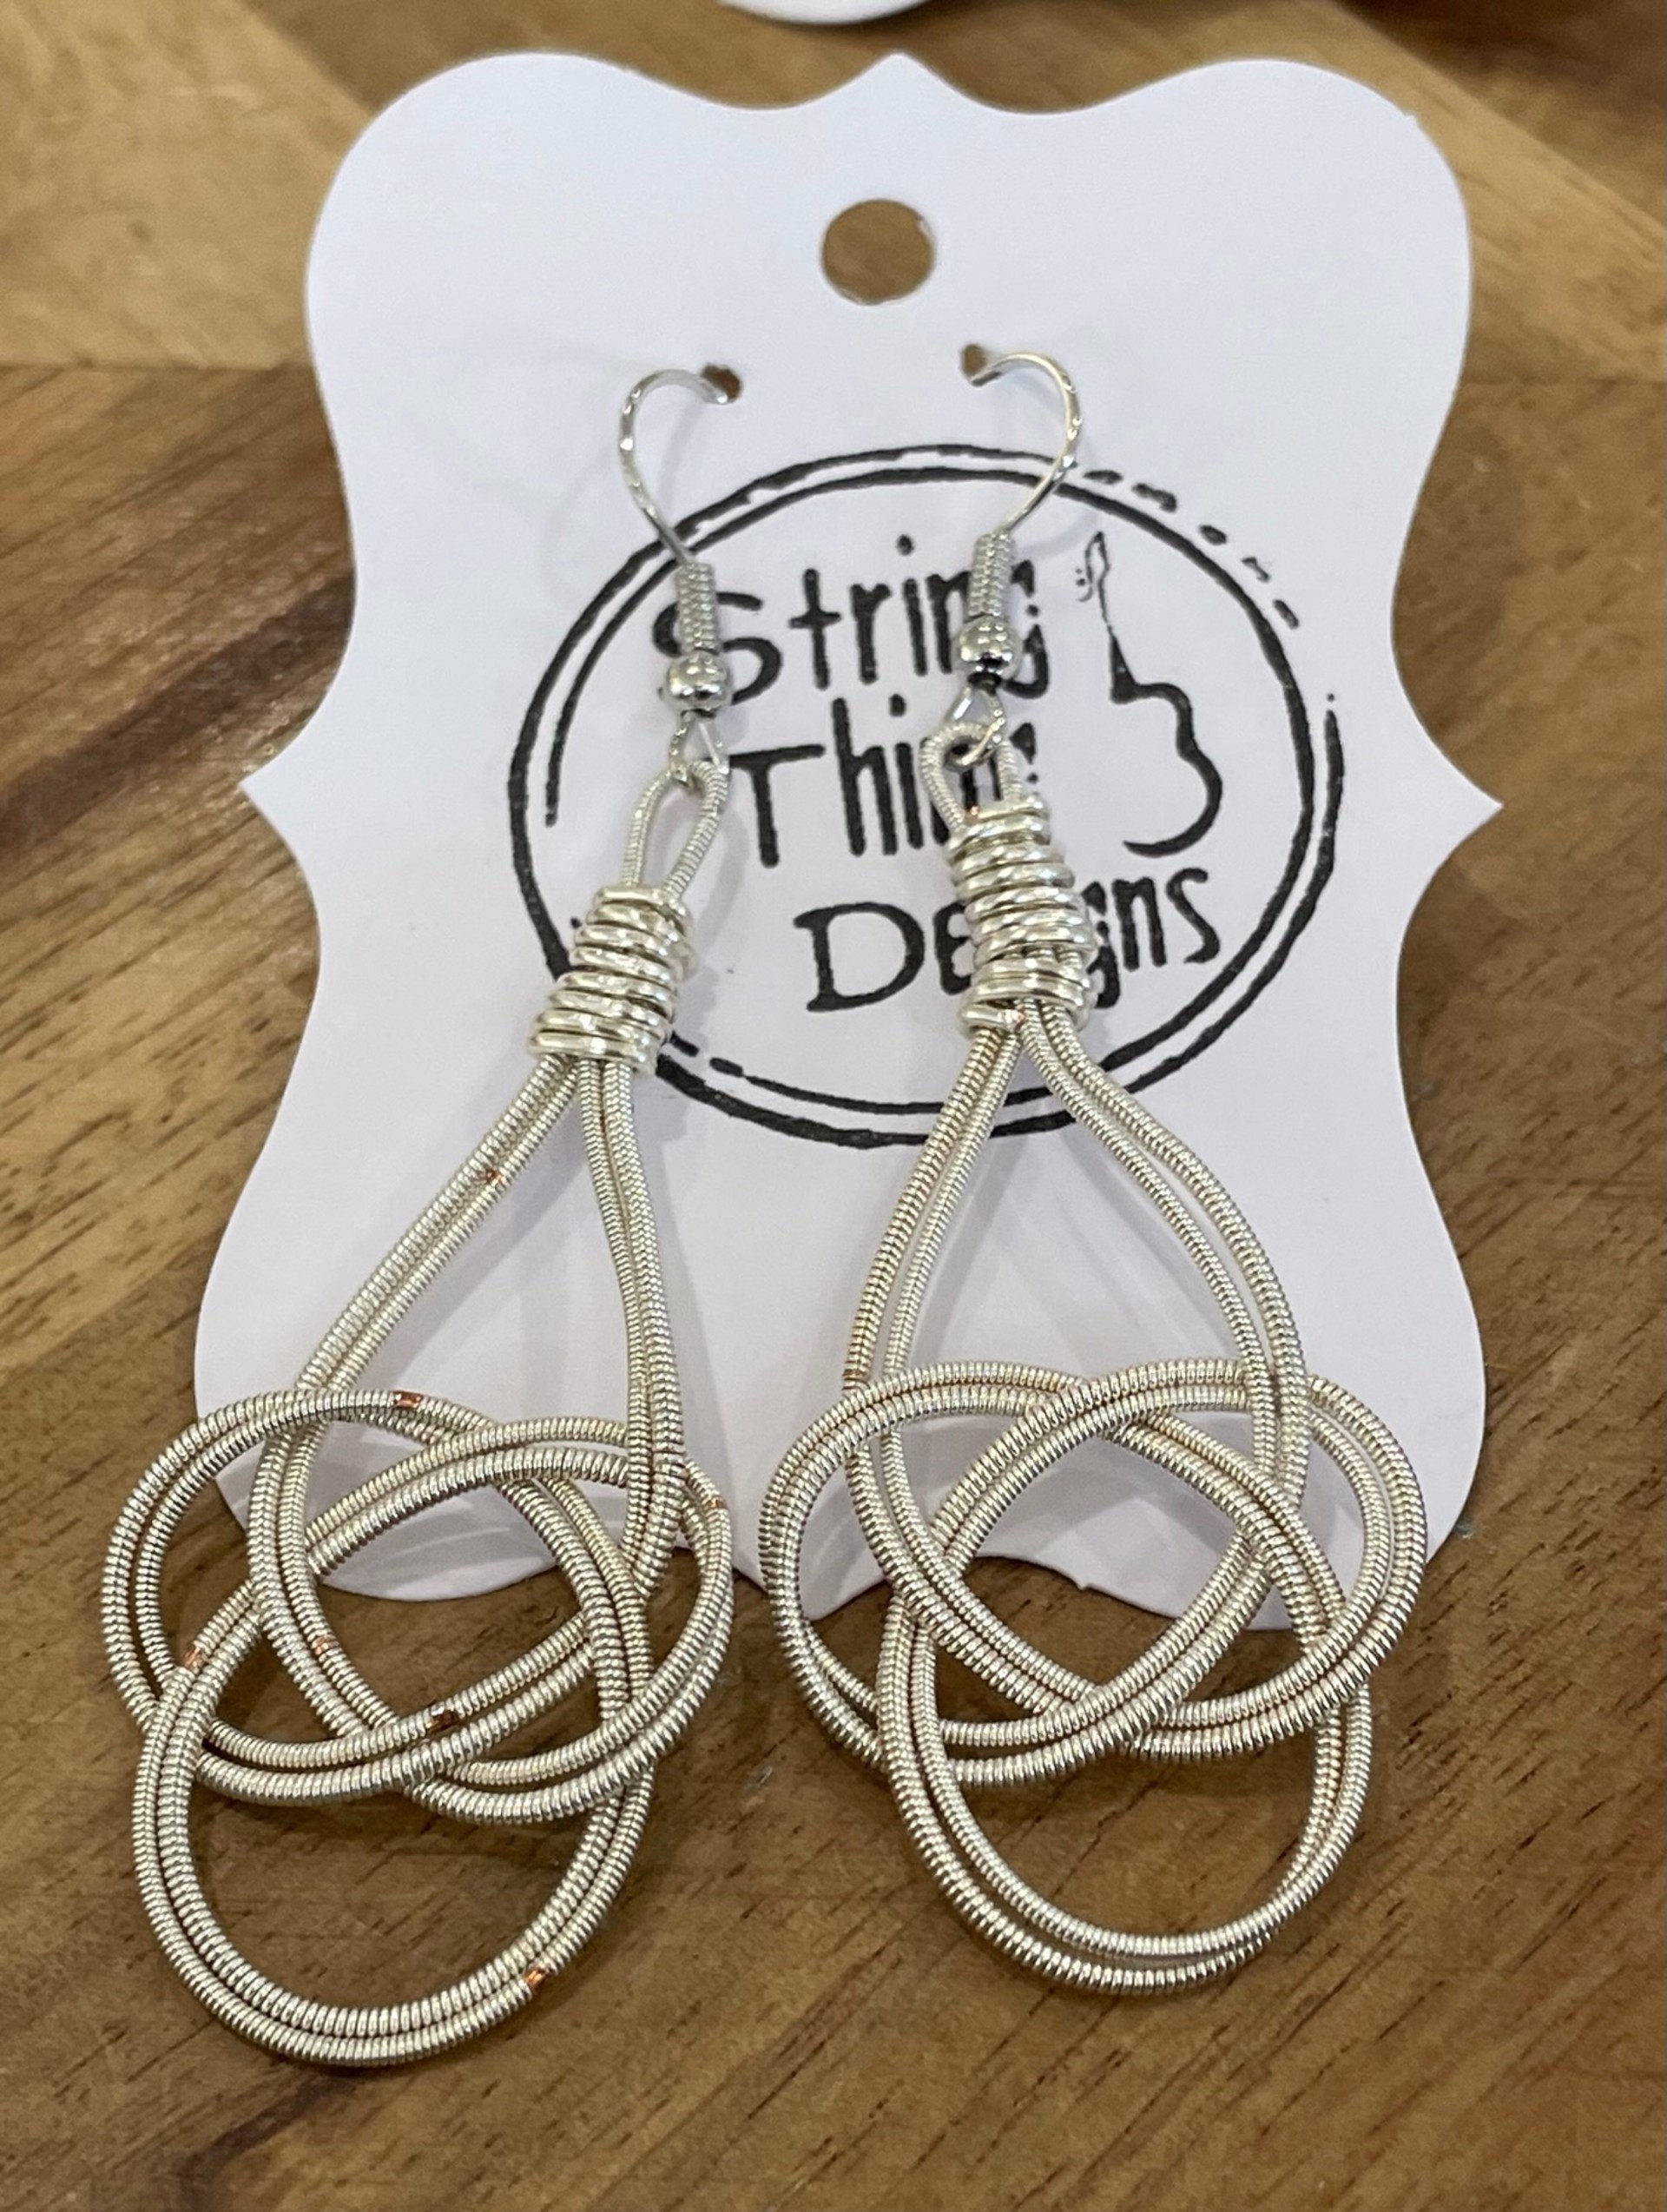 Light Knot Guiltar String Earrings by String Thing Designs